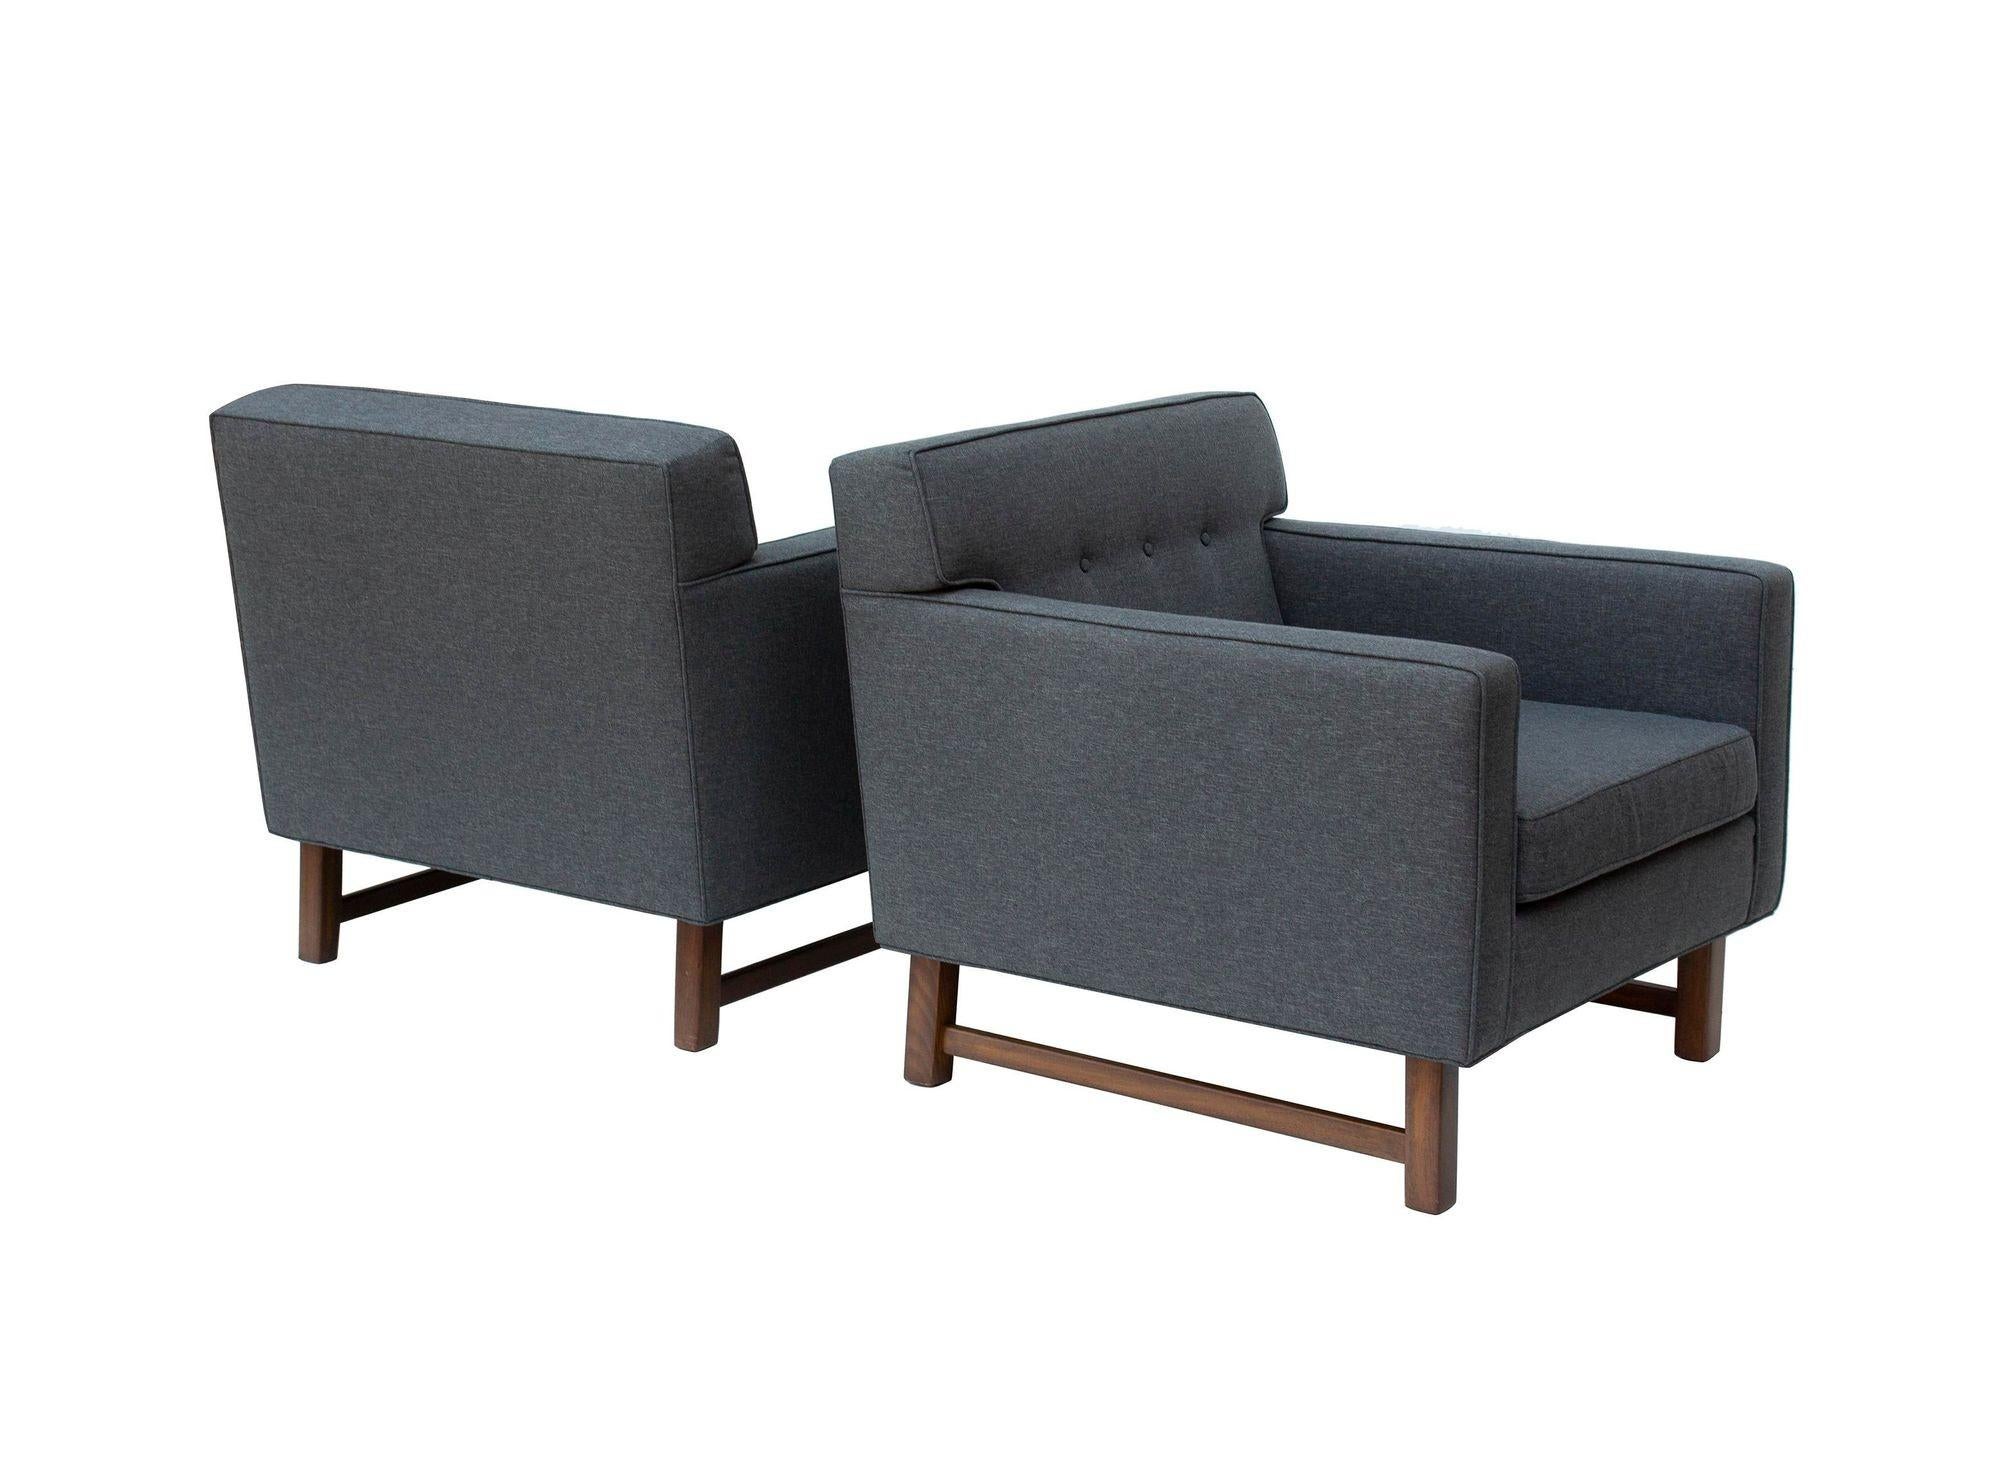 Mid-20th Century Tufted Midcentury Armchairs in the Style of Dunbar, a Pair For Sale